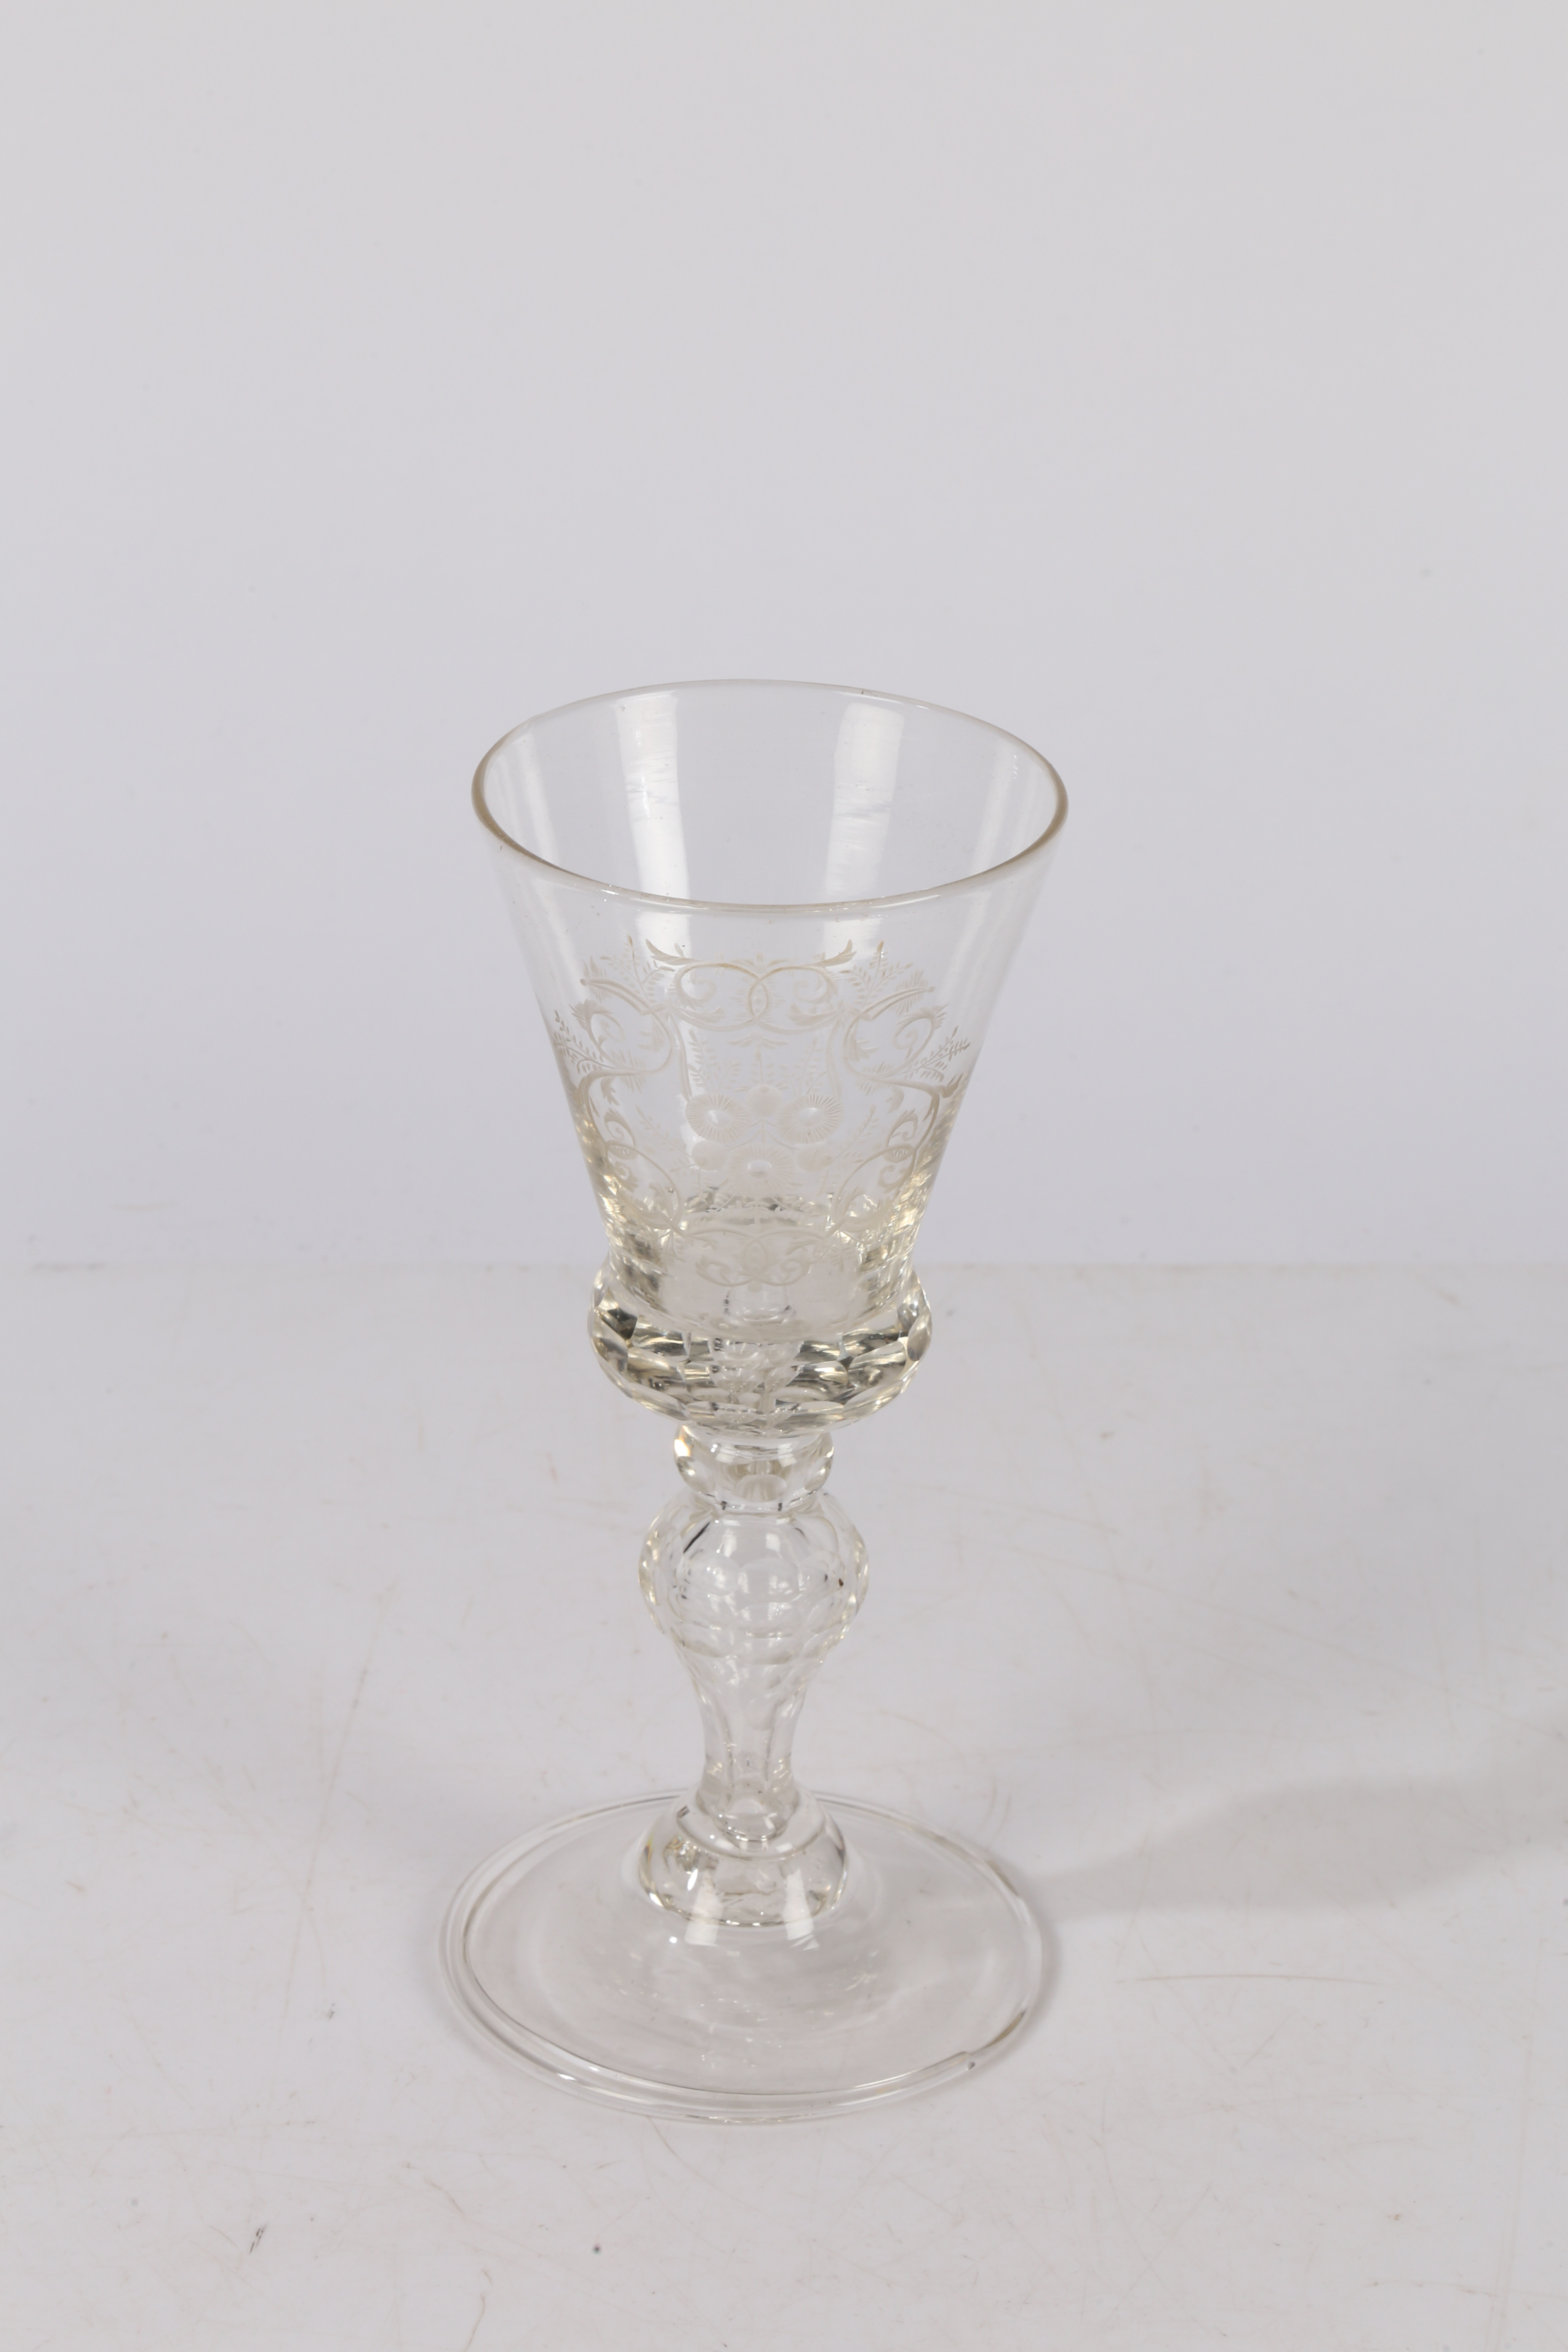 AN EARLY TO MID 18TH CENTURY BOHEMIAN GOBLET OF LARGE FORM. - Image 3 of 4